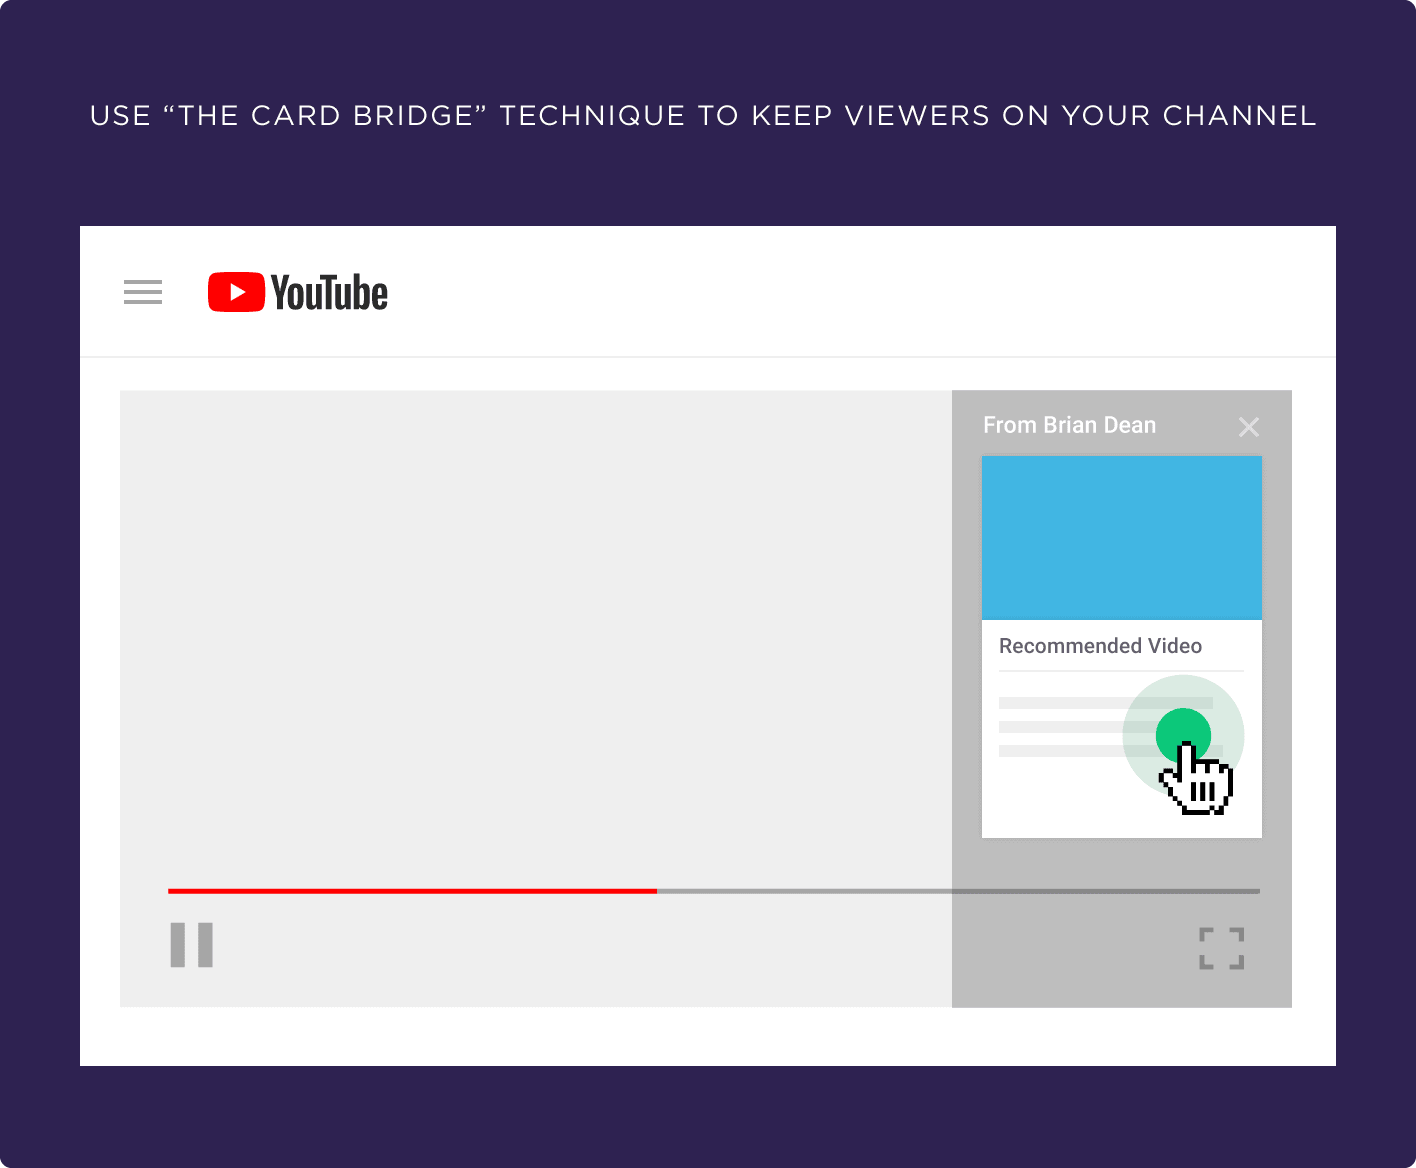 Use "The card bridge" technique to keep viewers on your channel